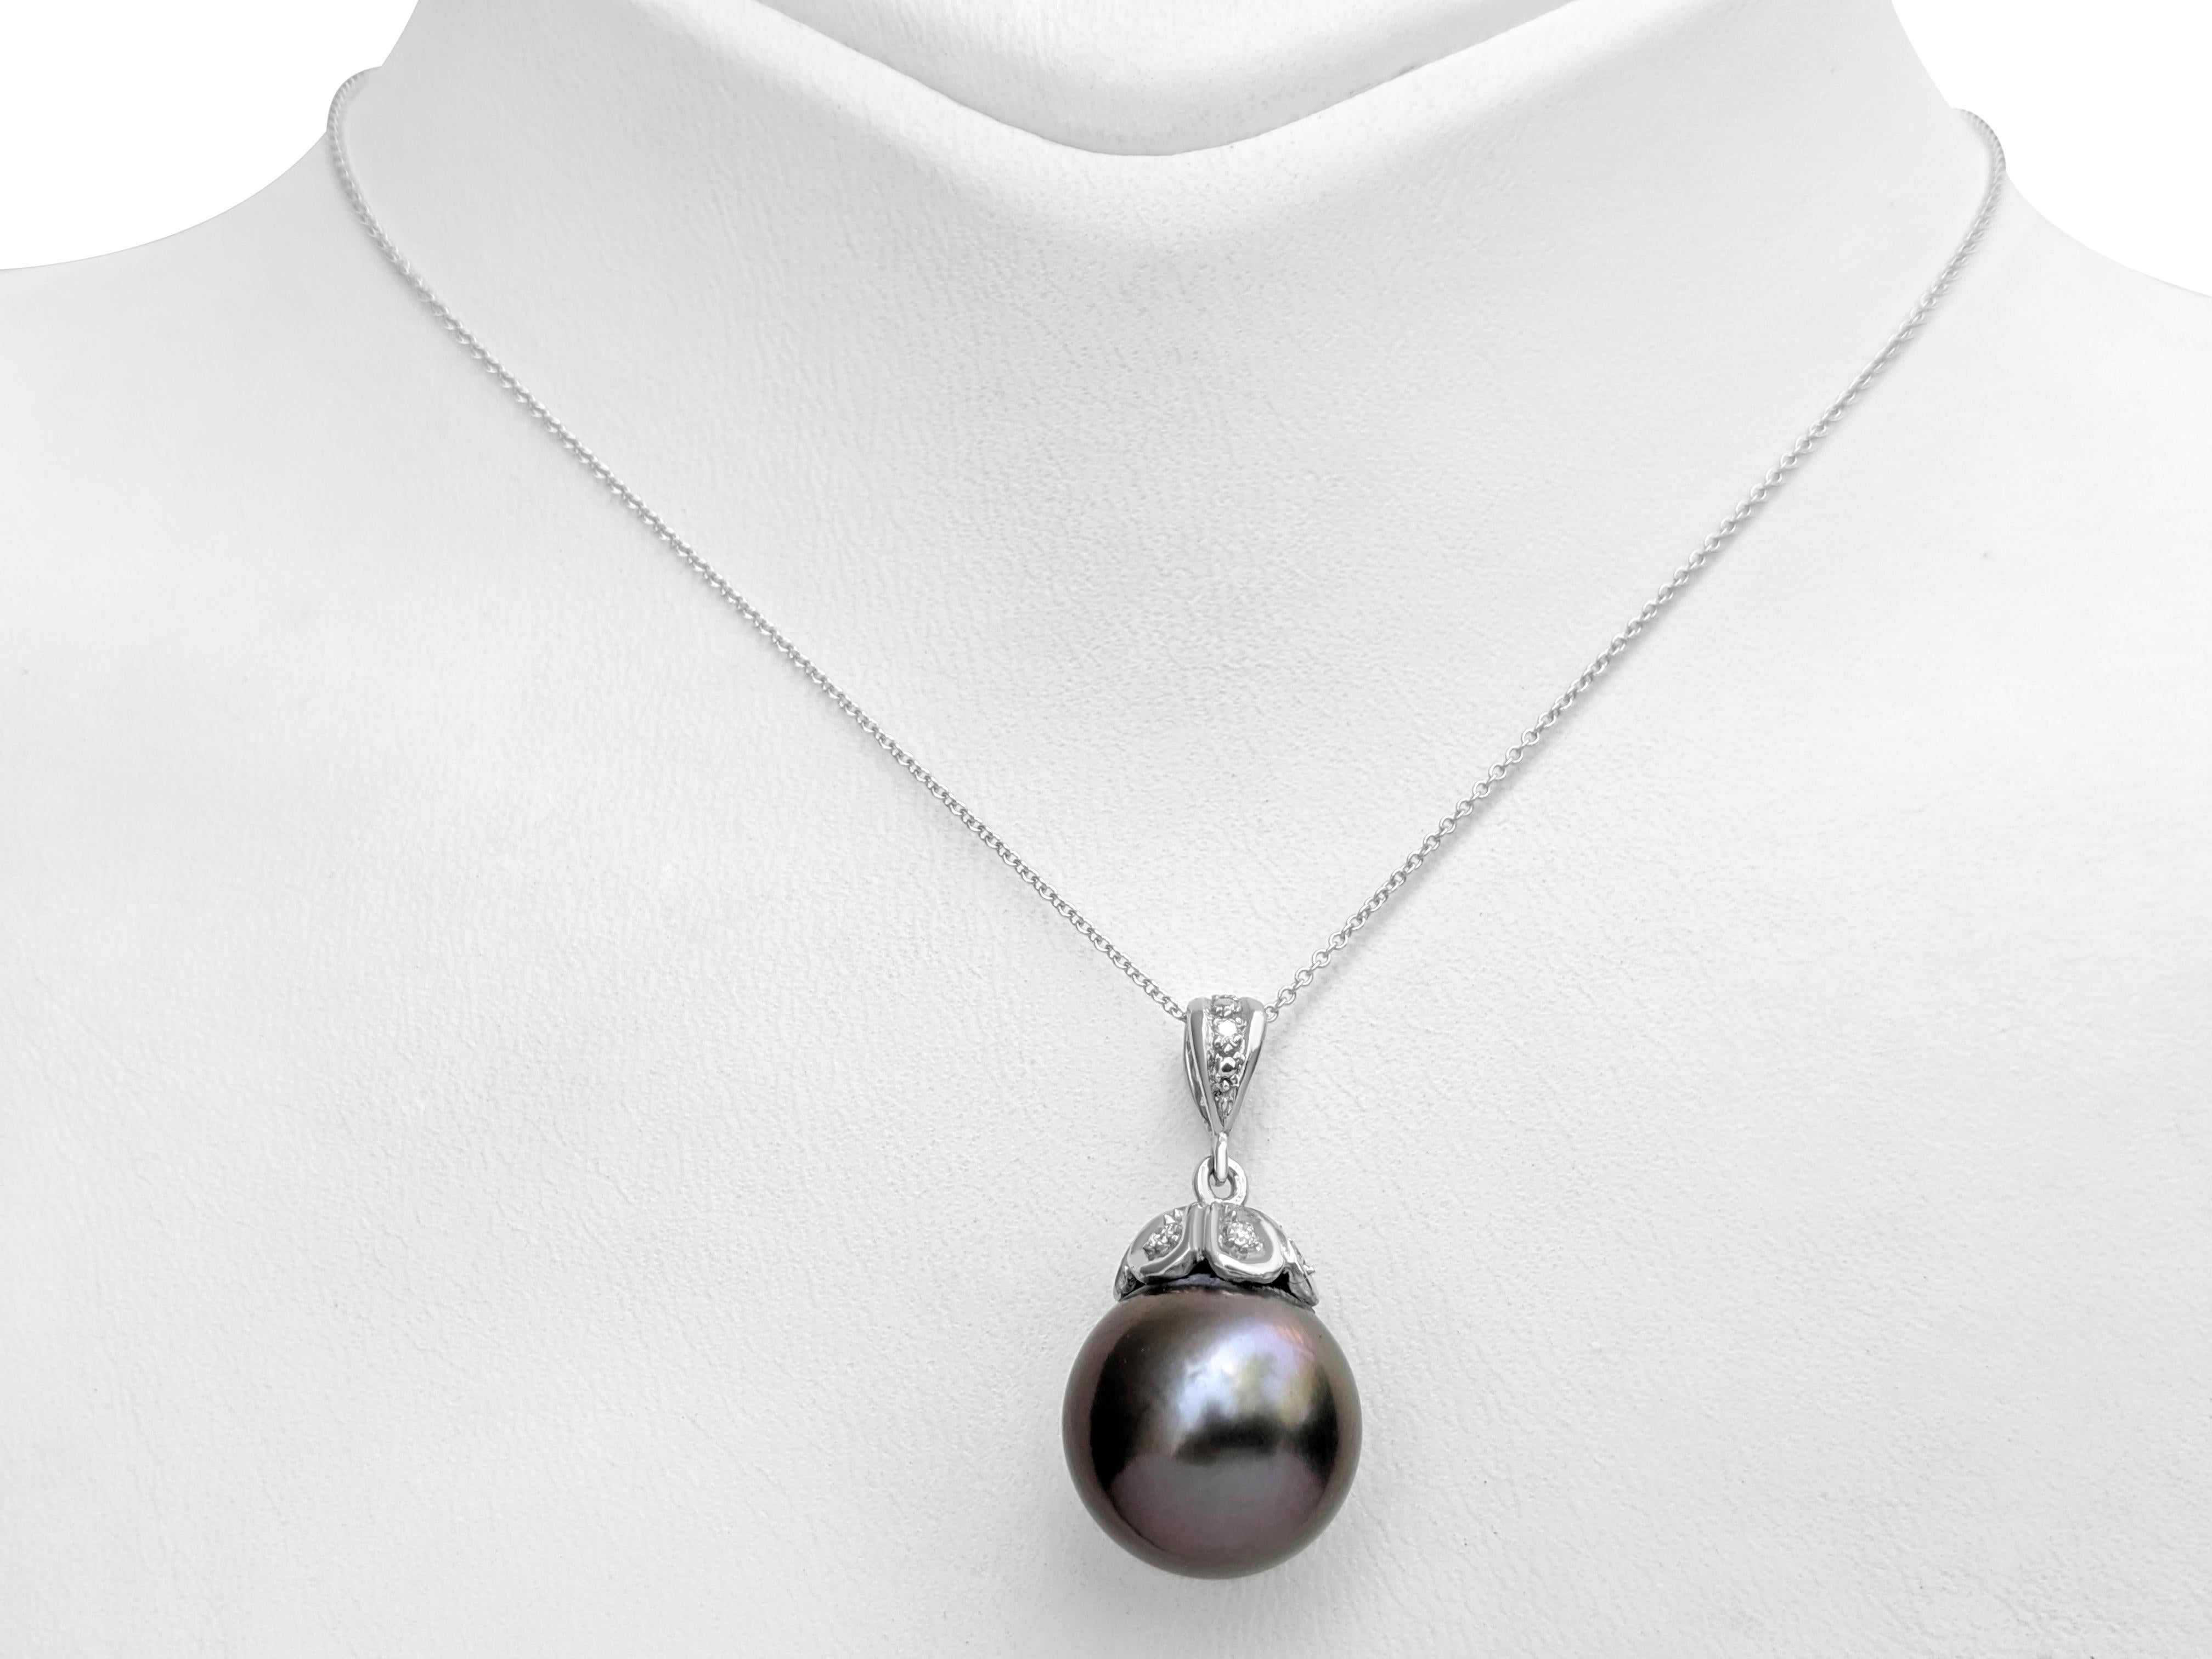 Center Cultured Pearl:
Size: 13.71-13.75MM
Color: Aubergine
Shape: Round Bead
Cultured Water Pearl

Side Stones Diamonds:
0.08 cttw, E-F, VS2-SI1 Natural Diamonds


Item ships from Israeli Diamonds Exchange, customers are responsible for any local